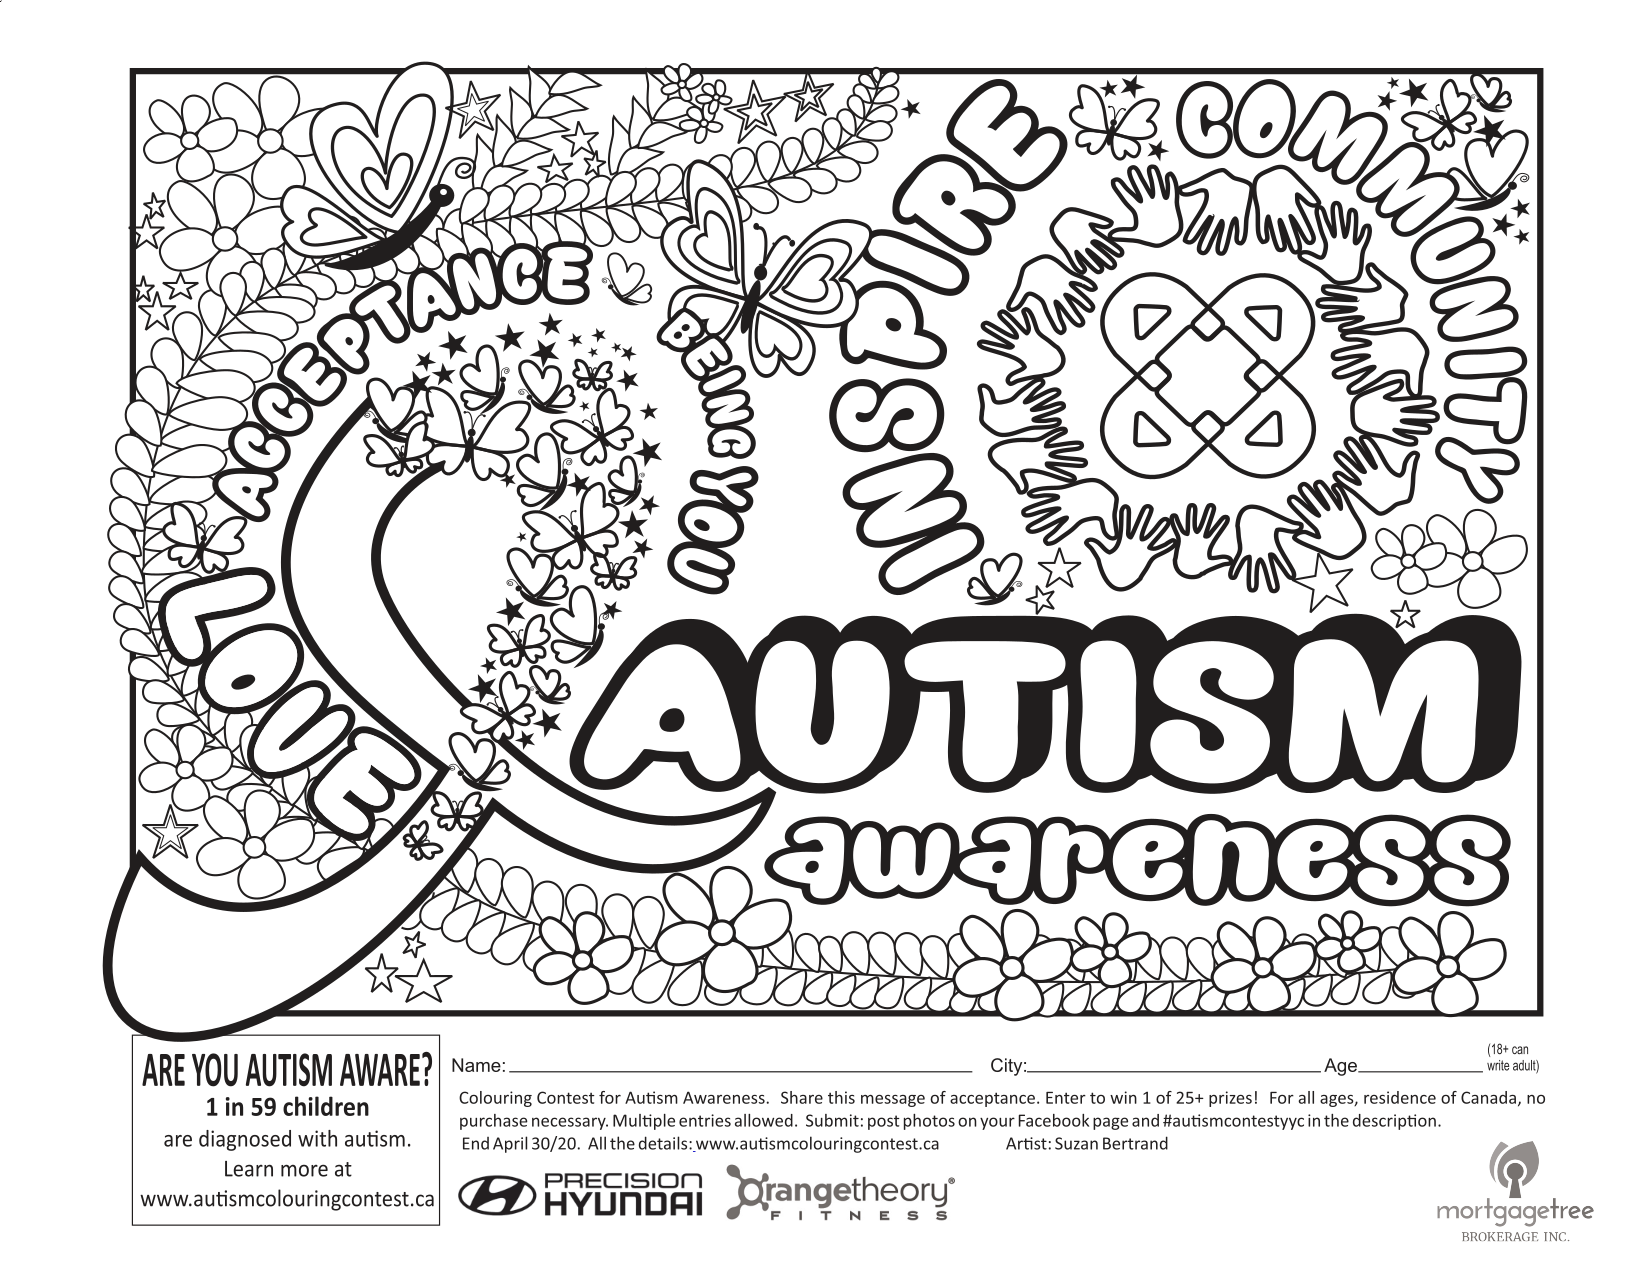 autism-awareness-colouring-contest_2020 - Mortgage Tree